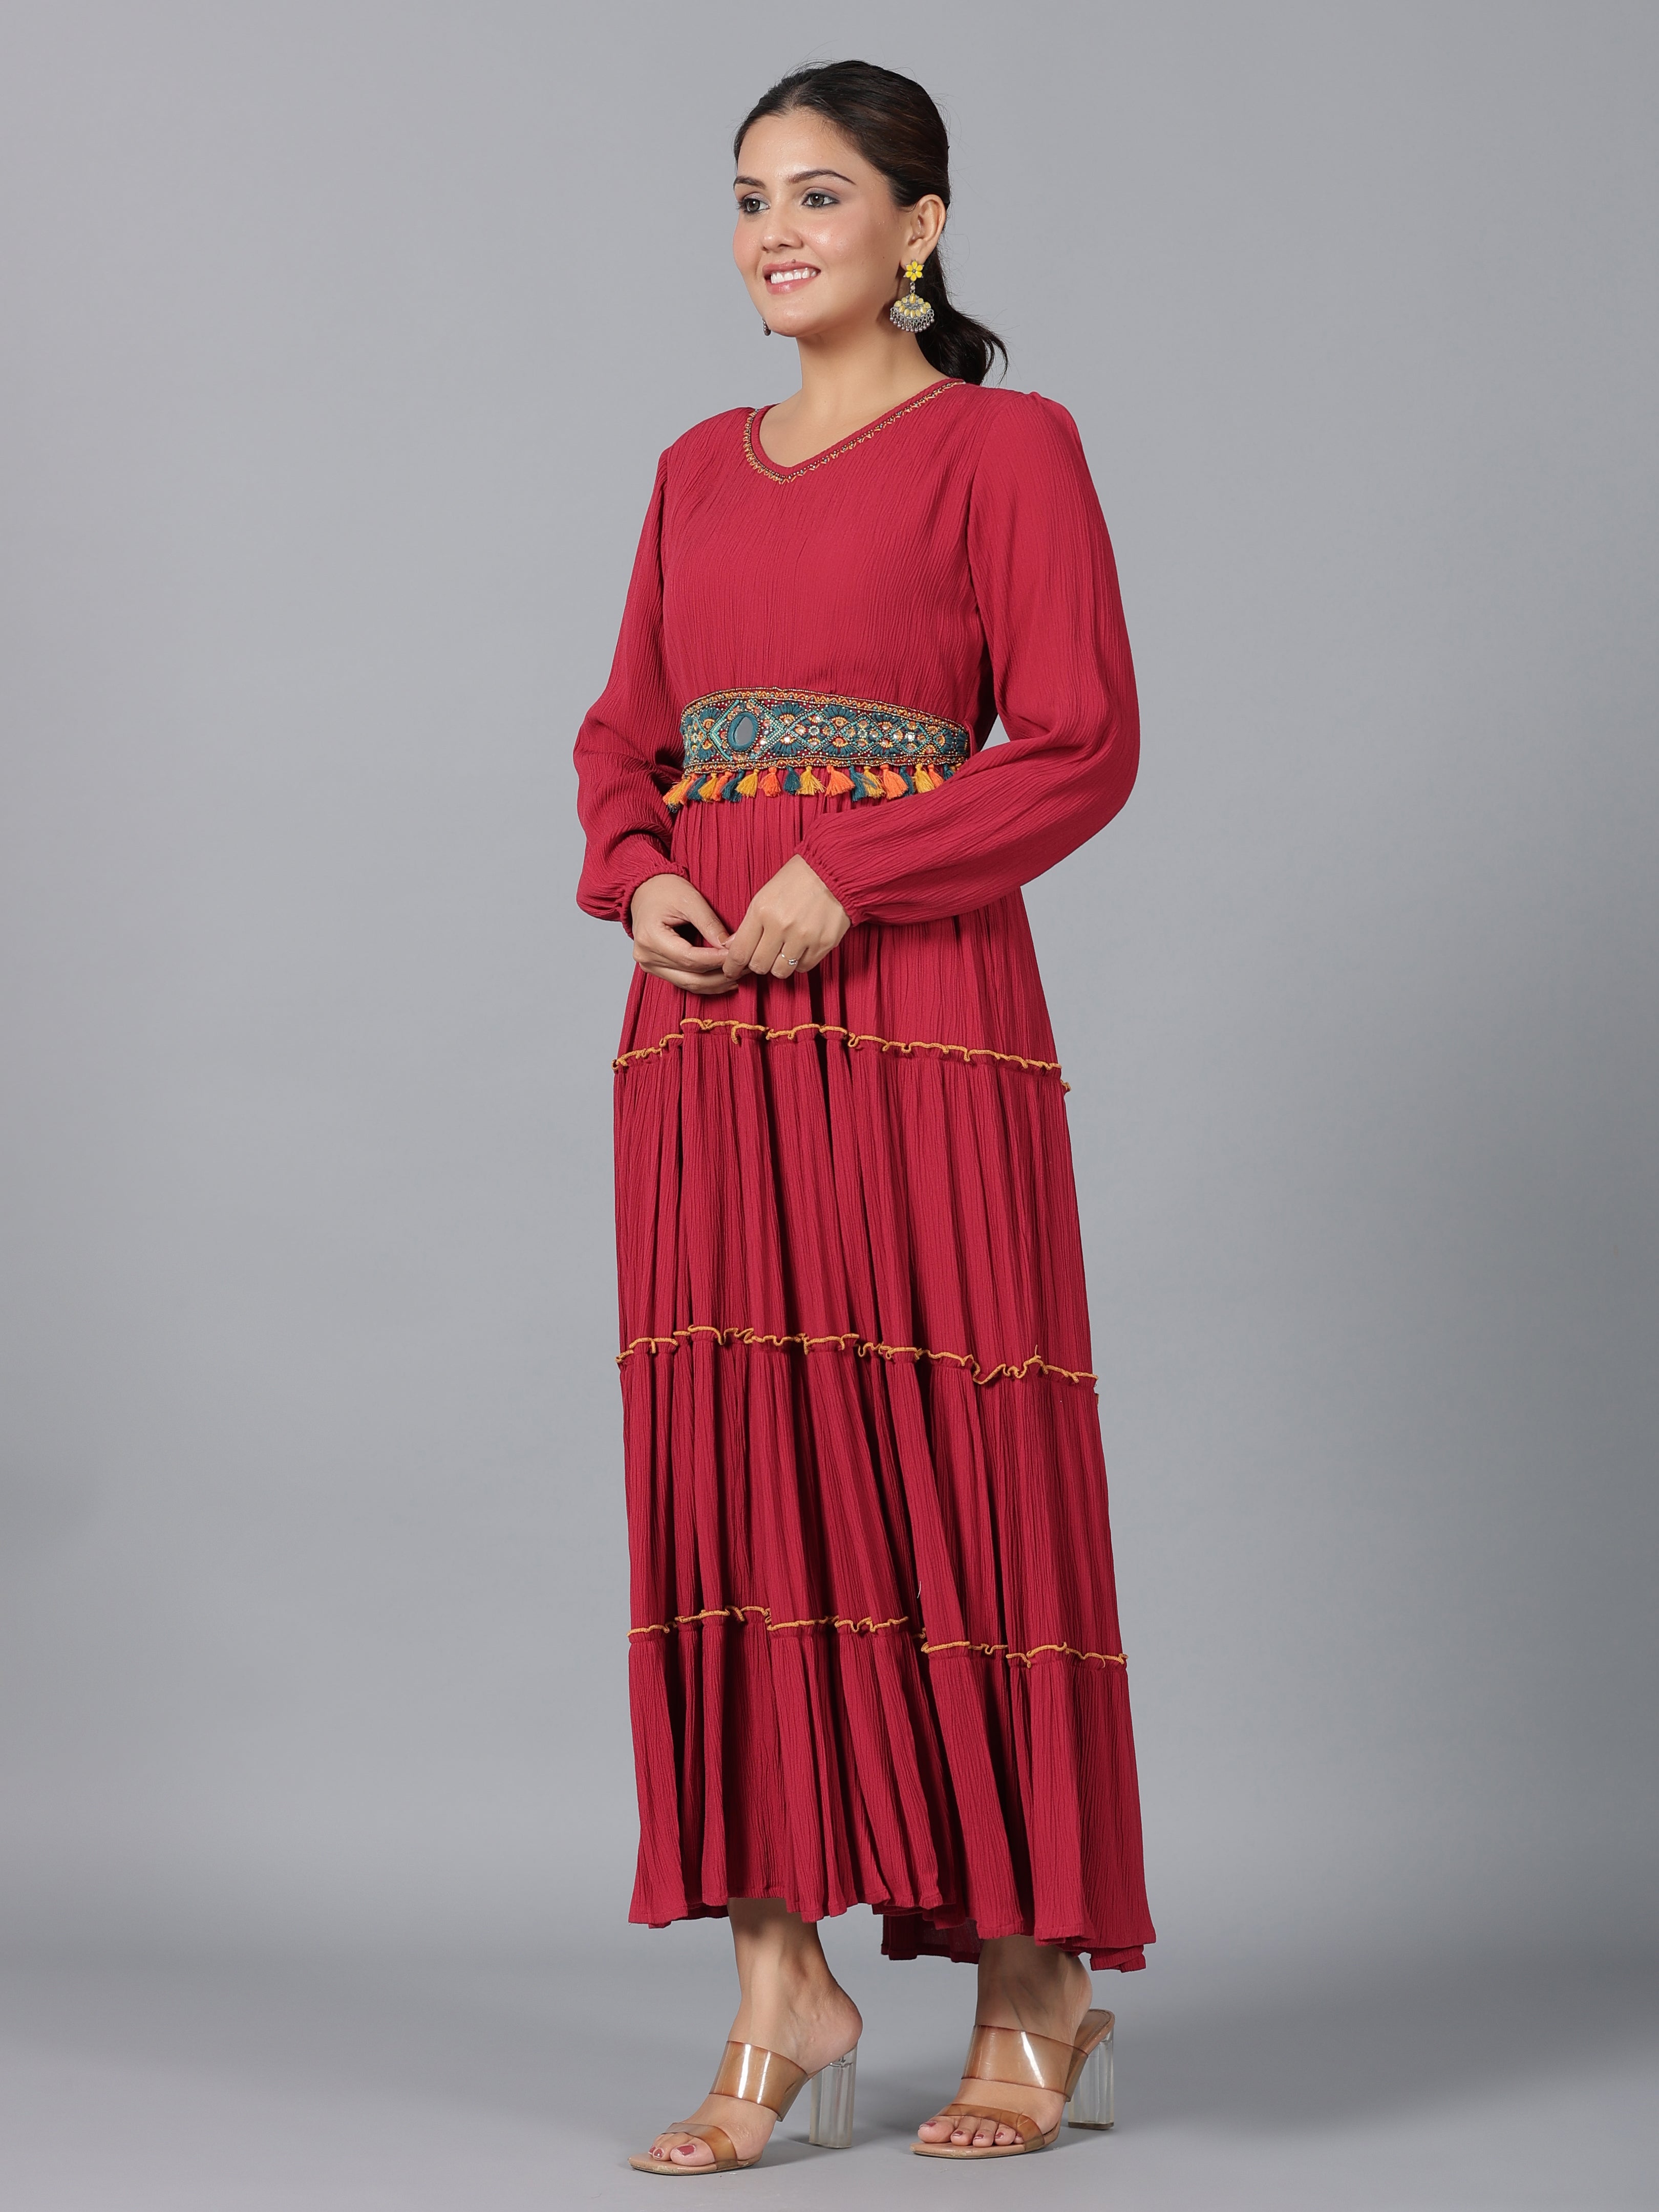 Juniper Maroon Ethnic Motif Printed Rayon Crepe Tiered Maxi Dress With Thread Work Embroidery